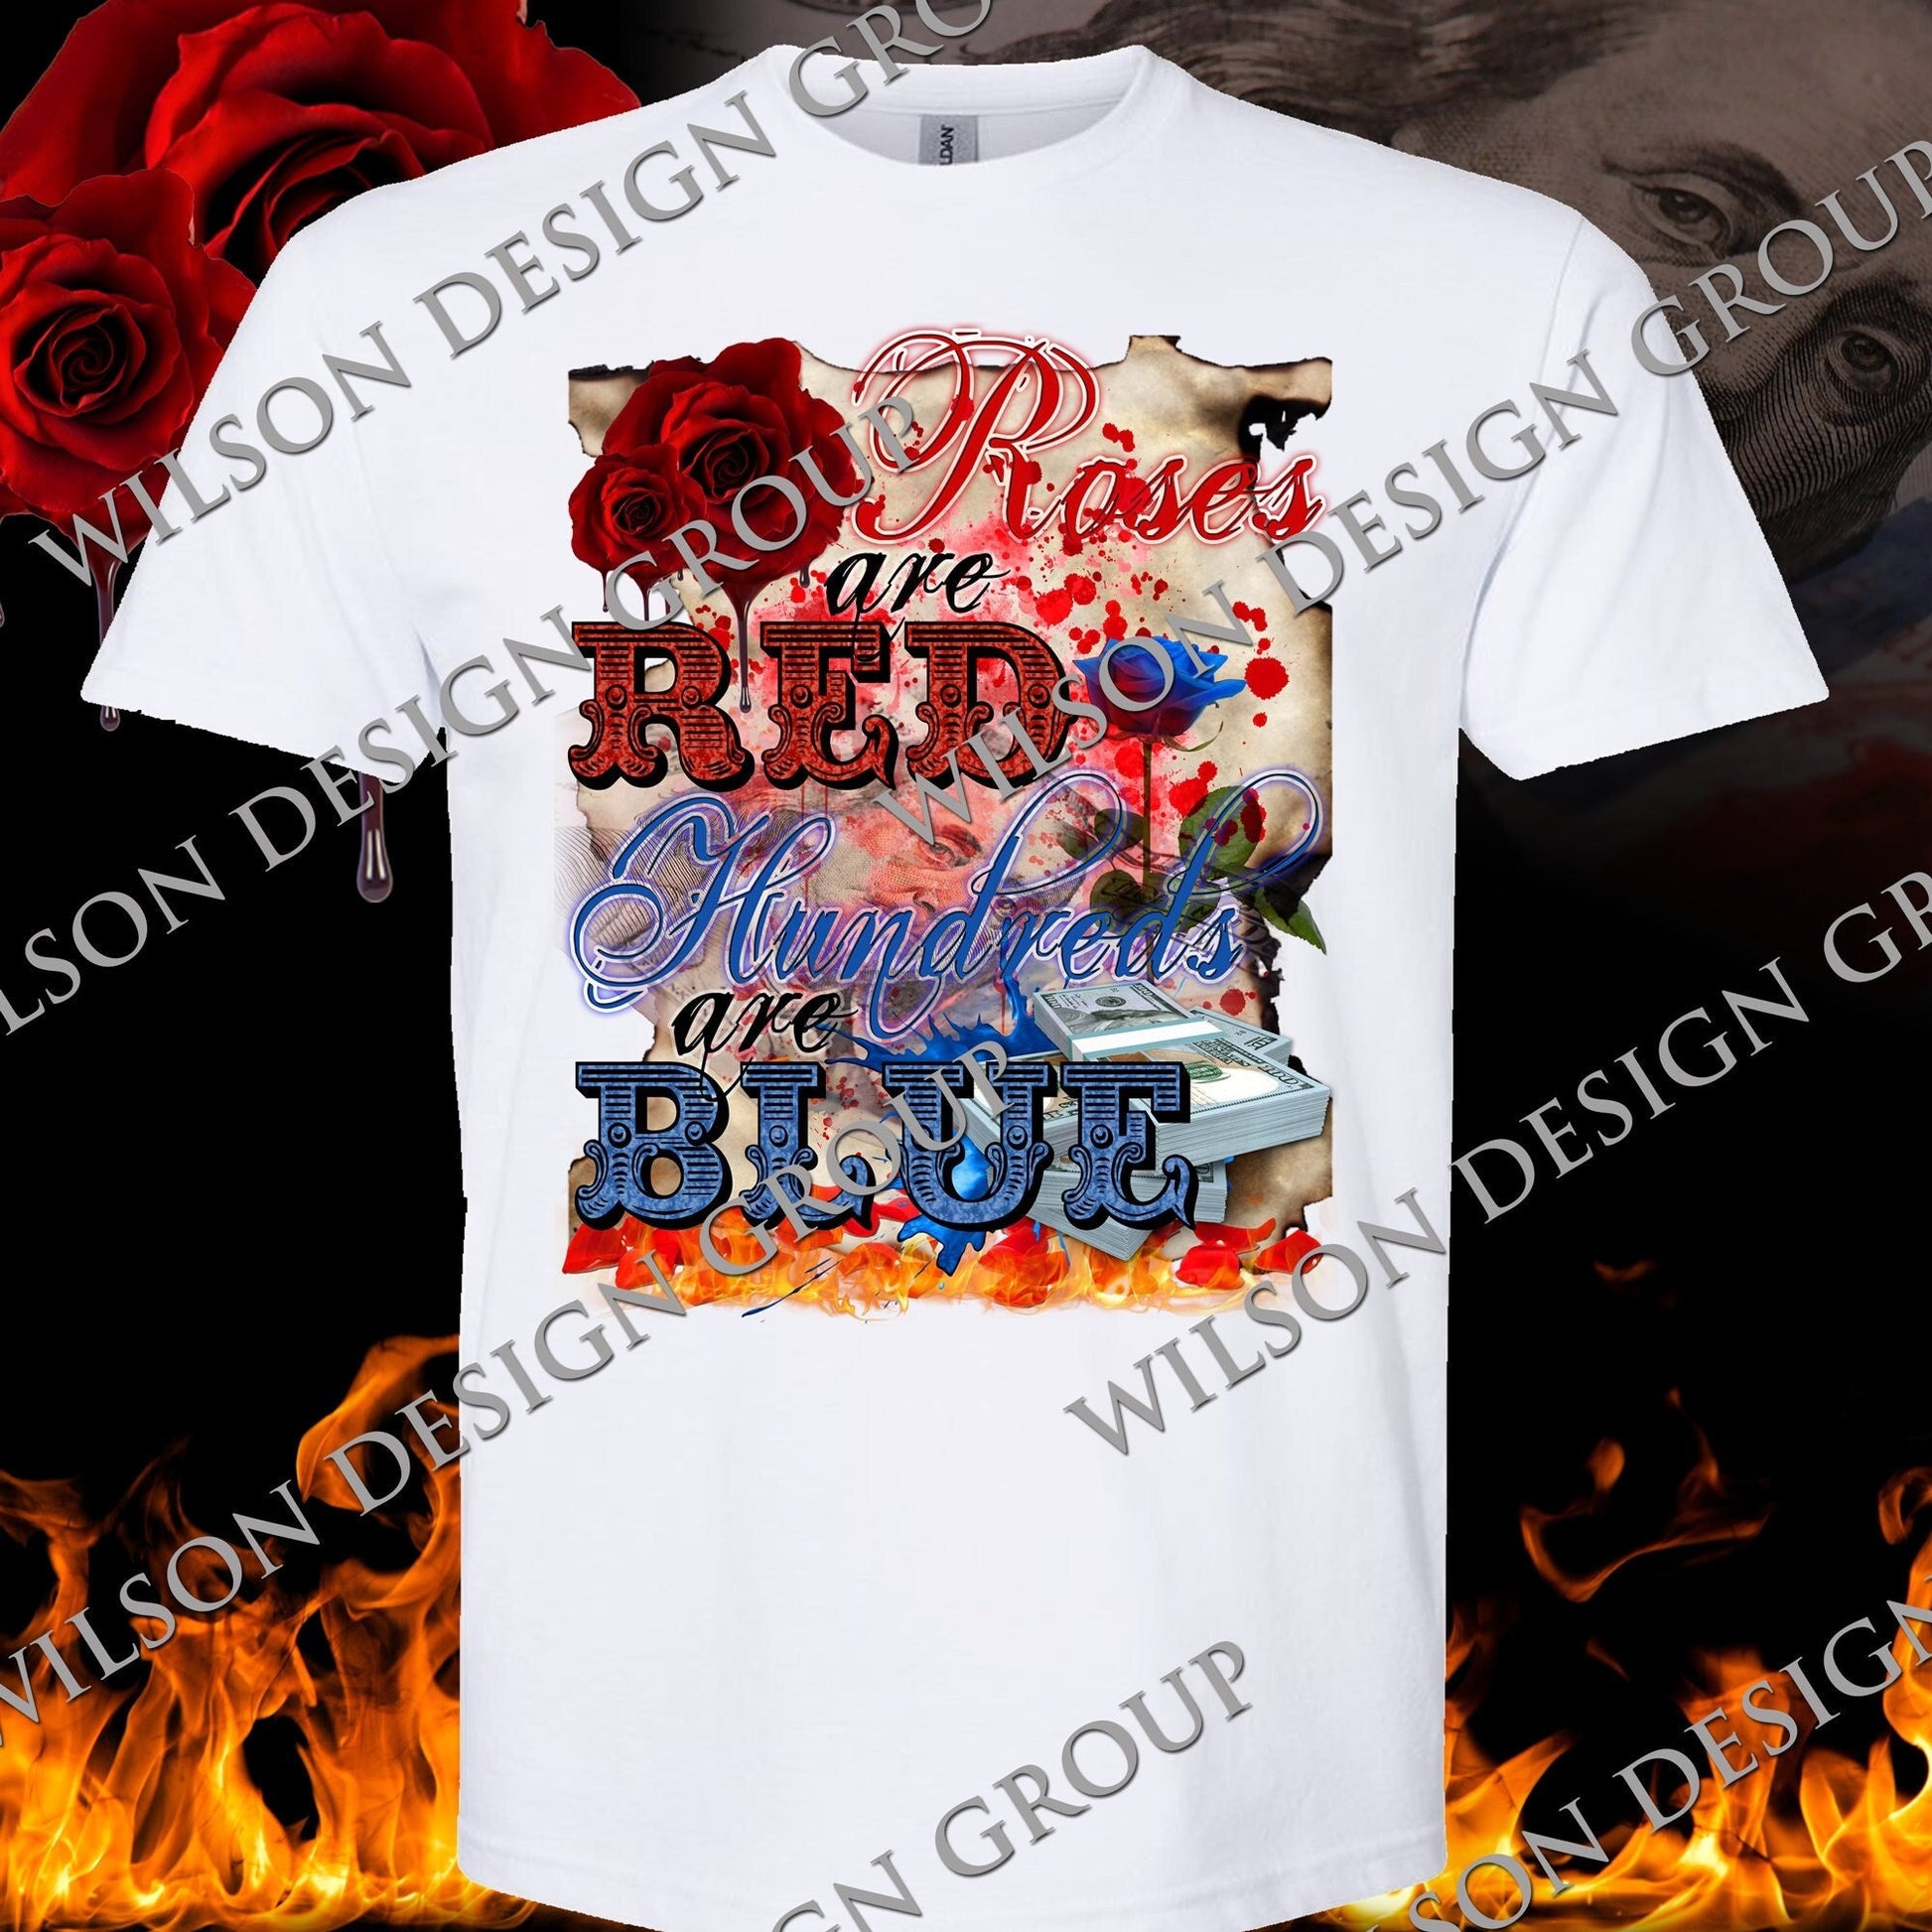 Roses are Red Hundreds are Blue T-Shirt - Wilson Design Group